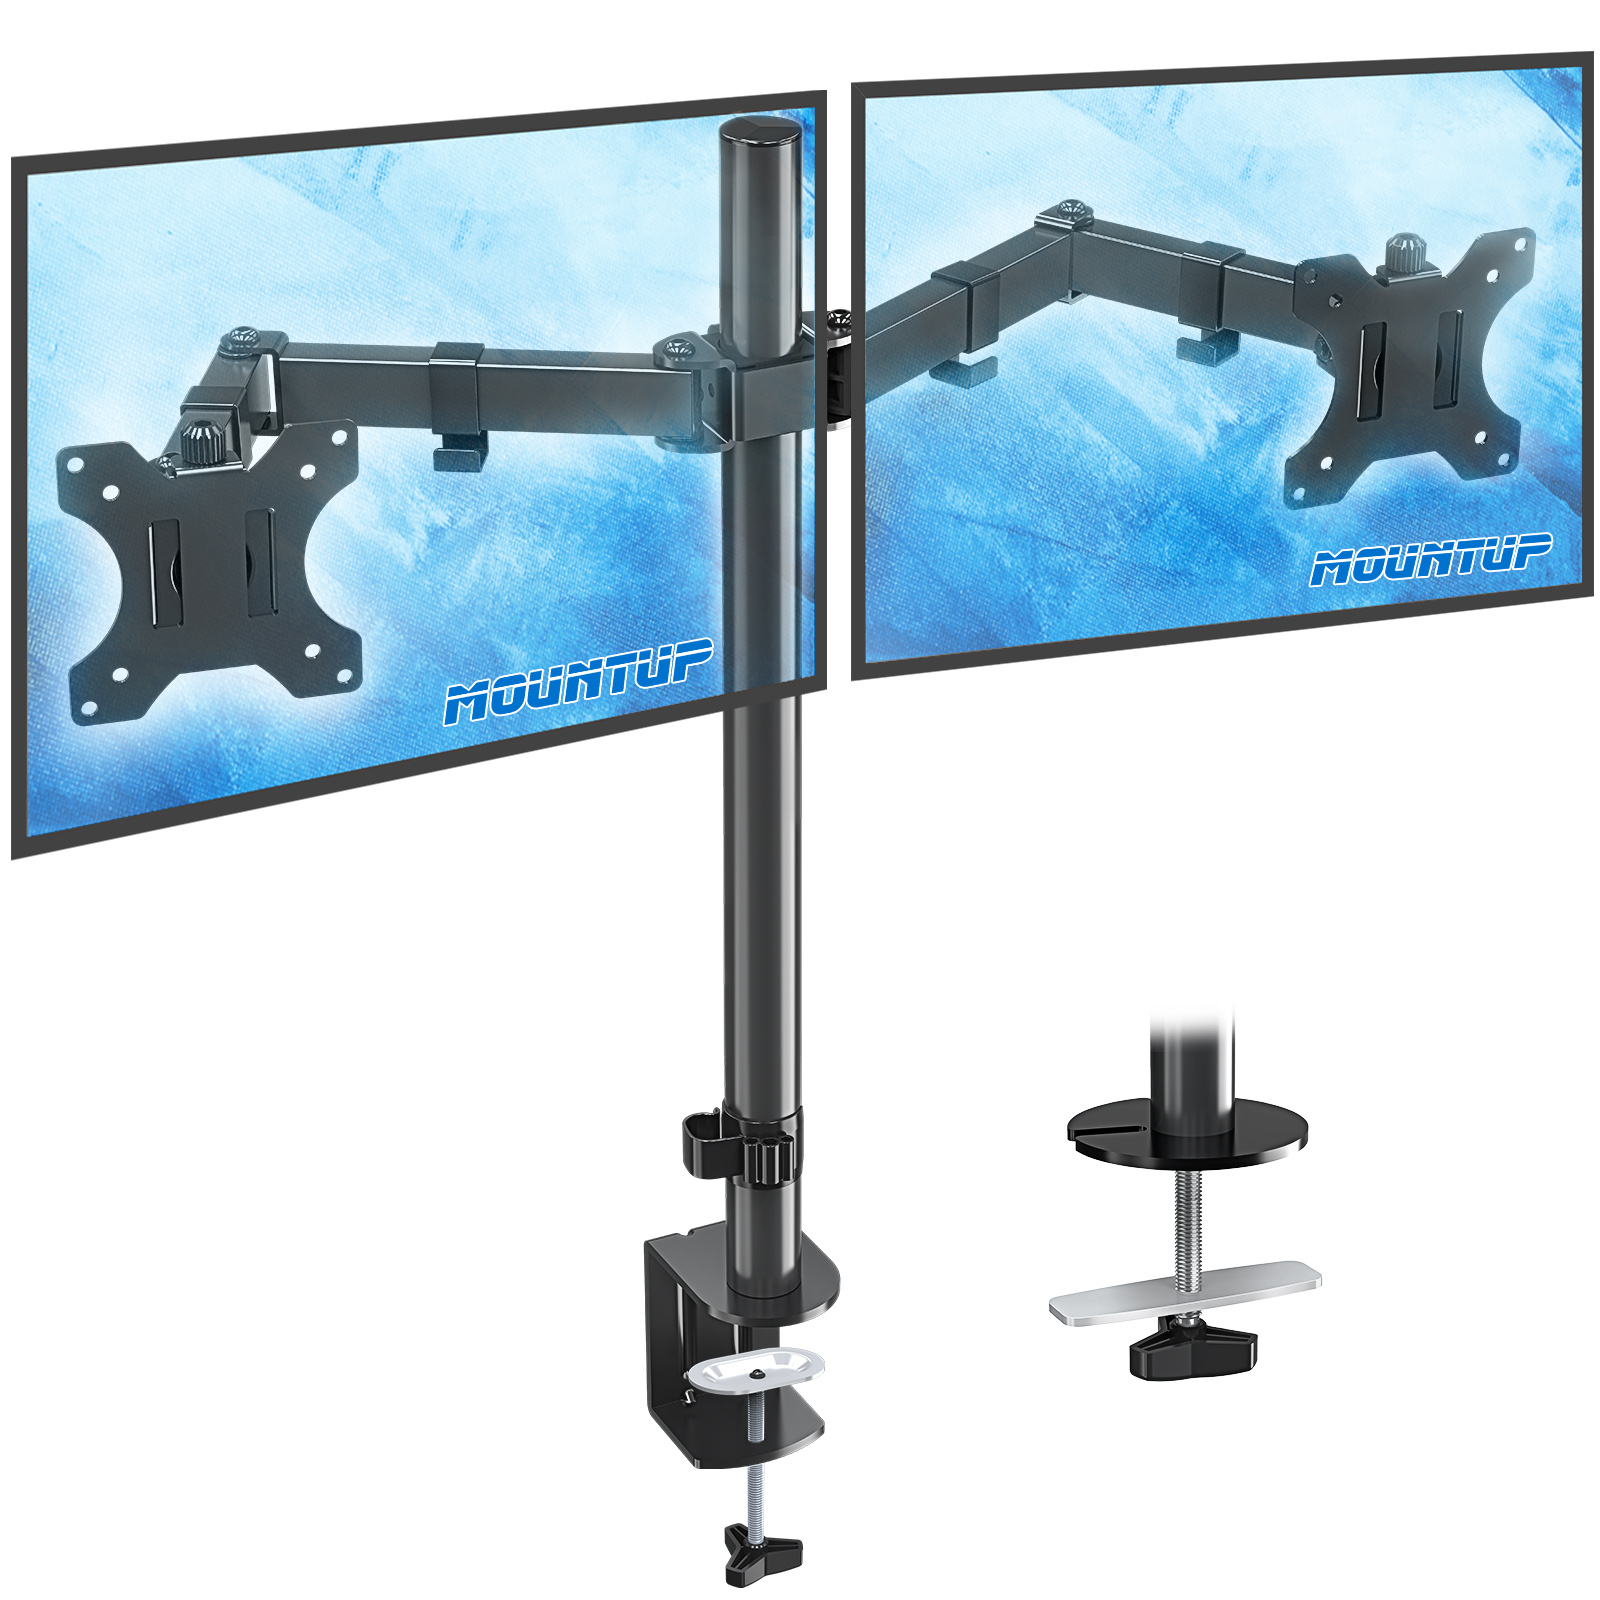 MOUNTUP 45% Off Adjustable Dual Monitor Mount for 17"-27" Monitors Only $16.49 with Clip Coupon + Free Shipping